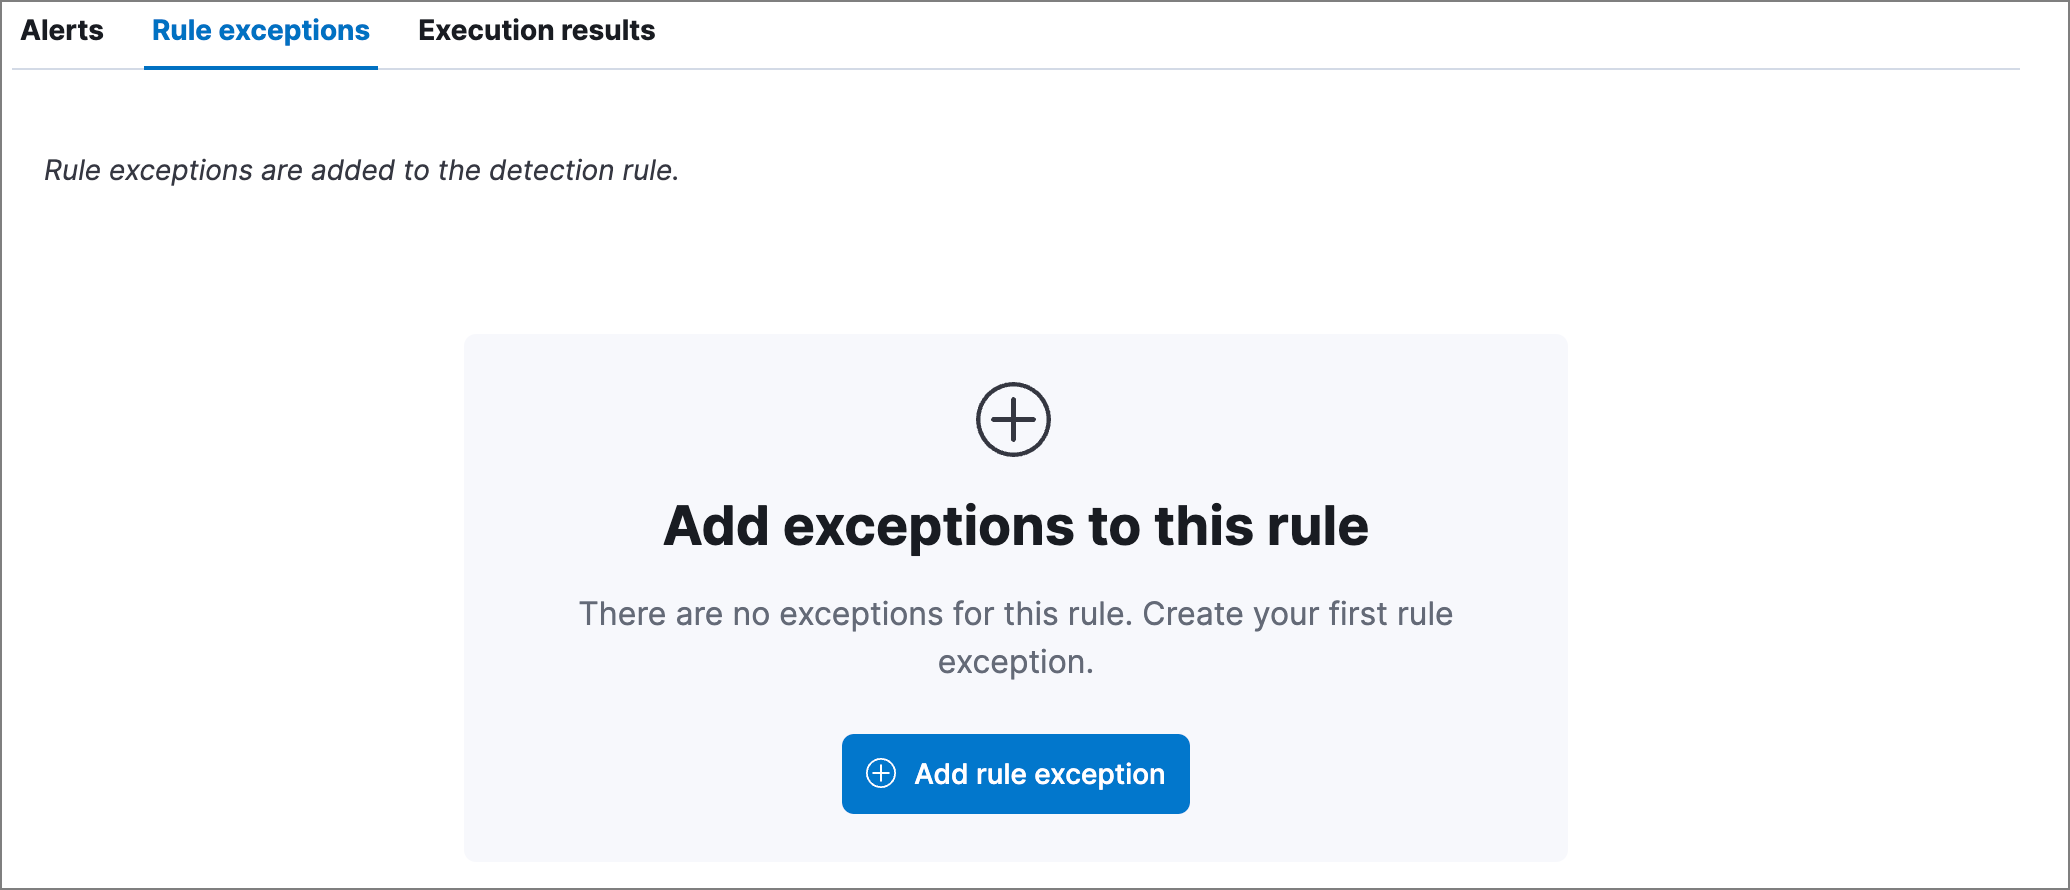 Detail of rule exceptions tab